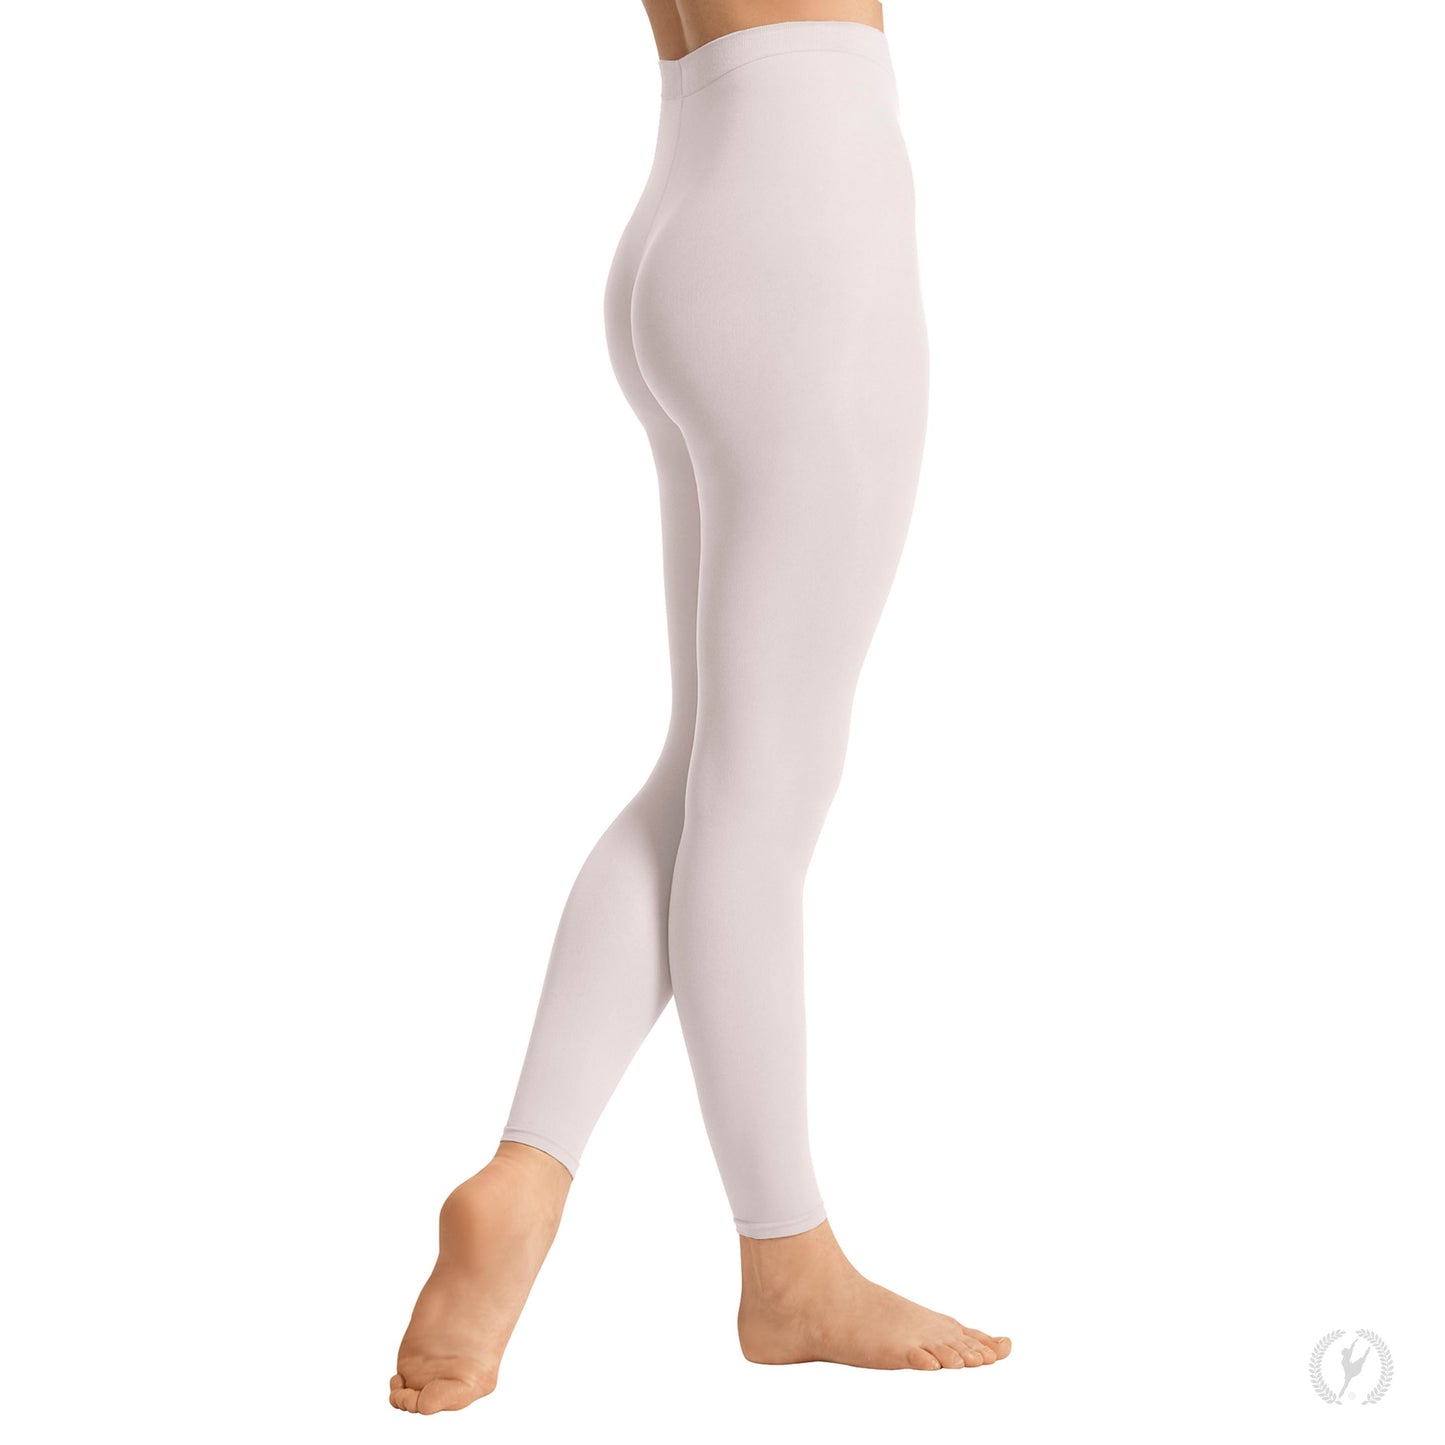 White Opaque Footless Tights for Women 